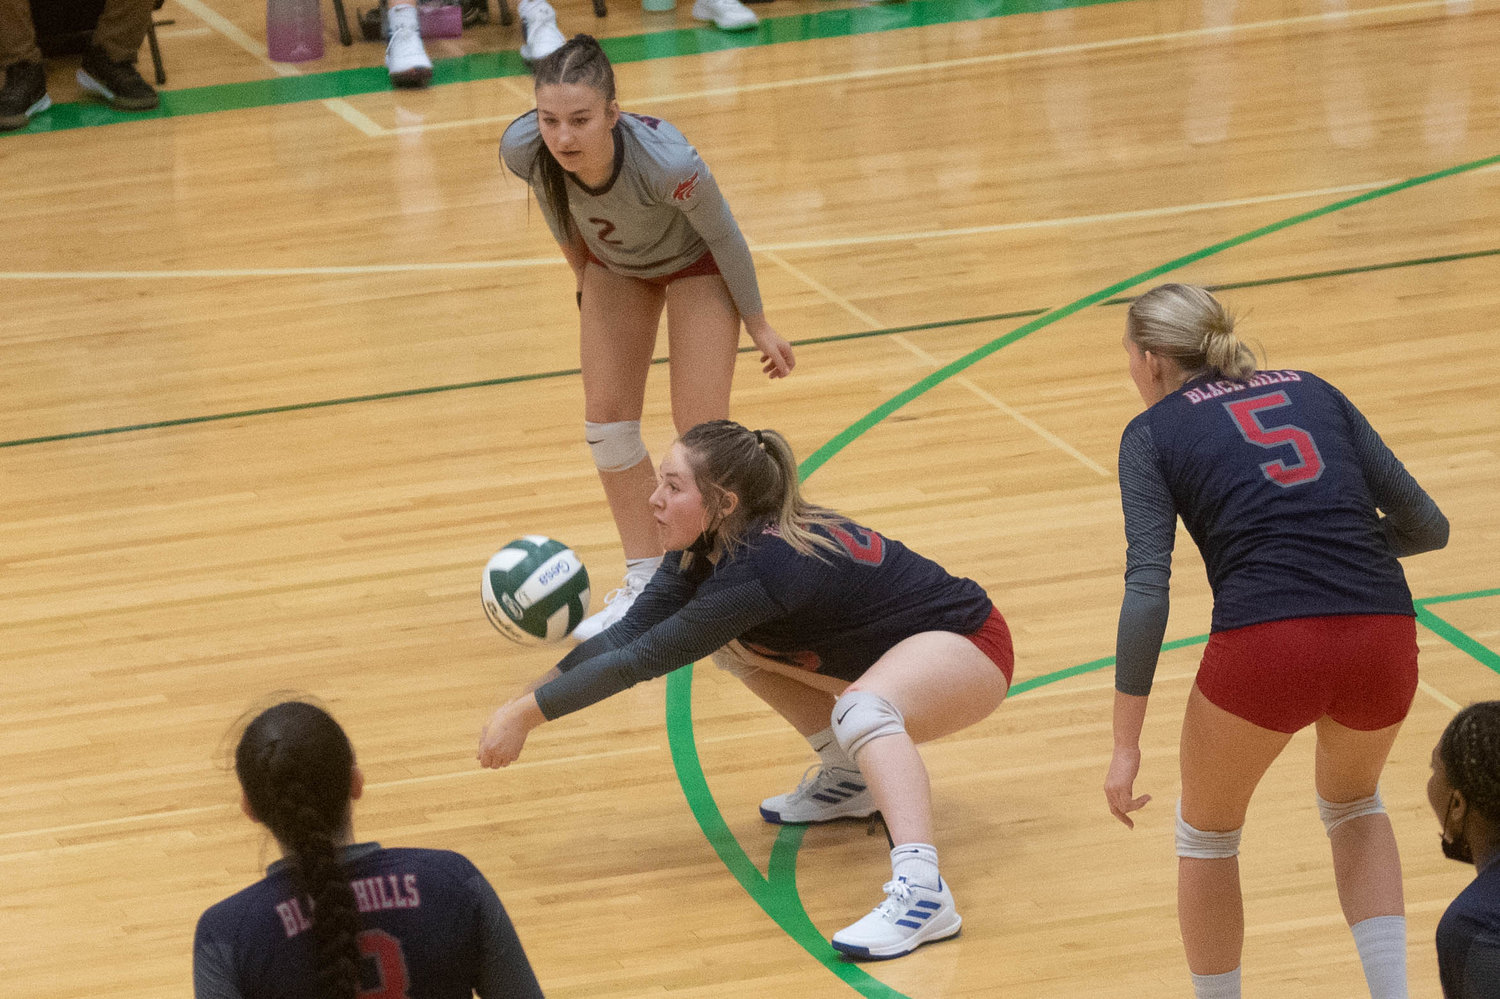 Black Hills junior Charlotte Michaud digs up a serve against R.A. Long in the opening round of the 2A District 4 tournament in Tumwater Nov. 11.